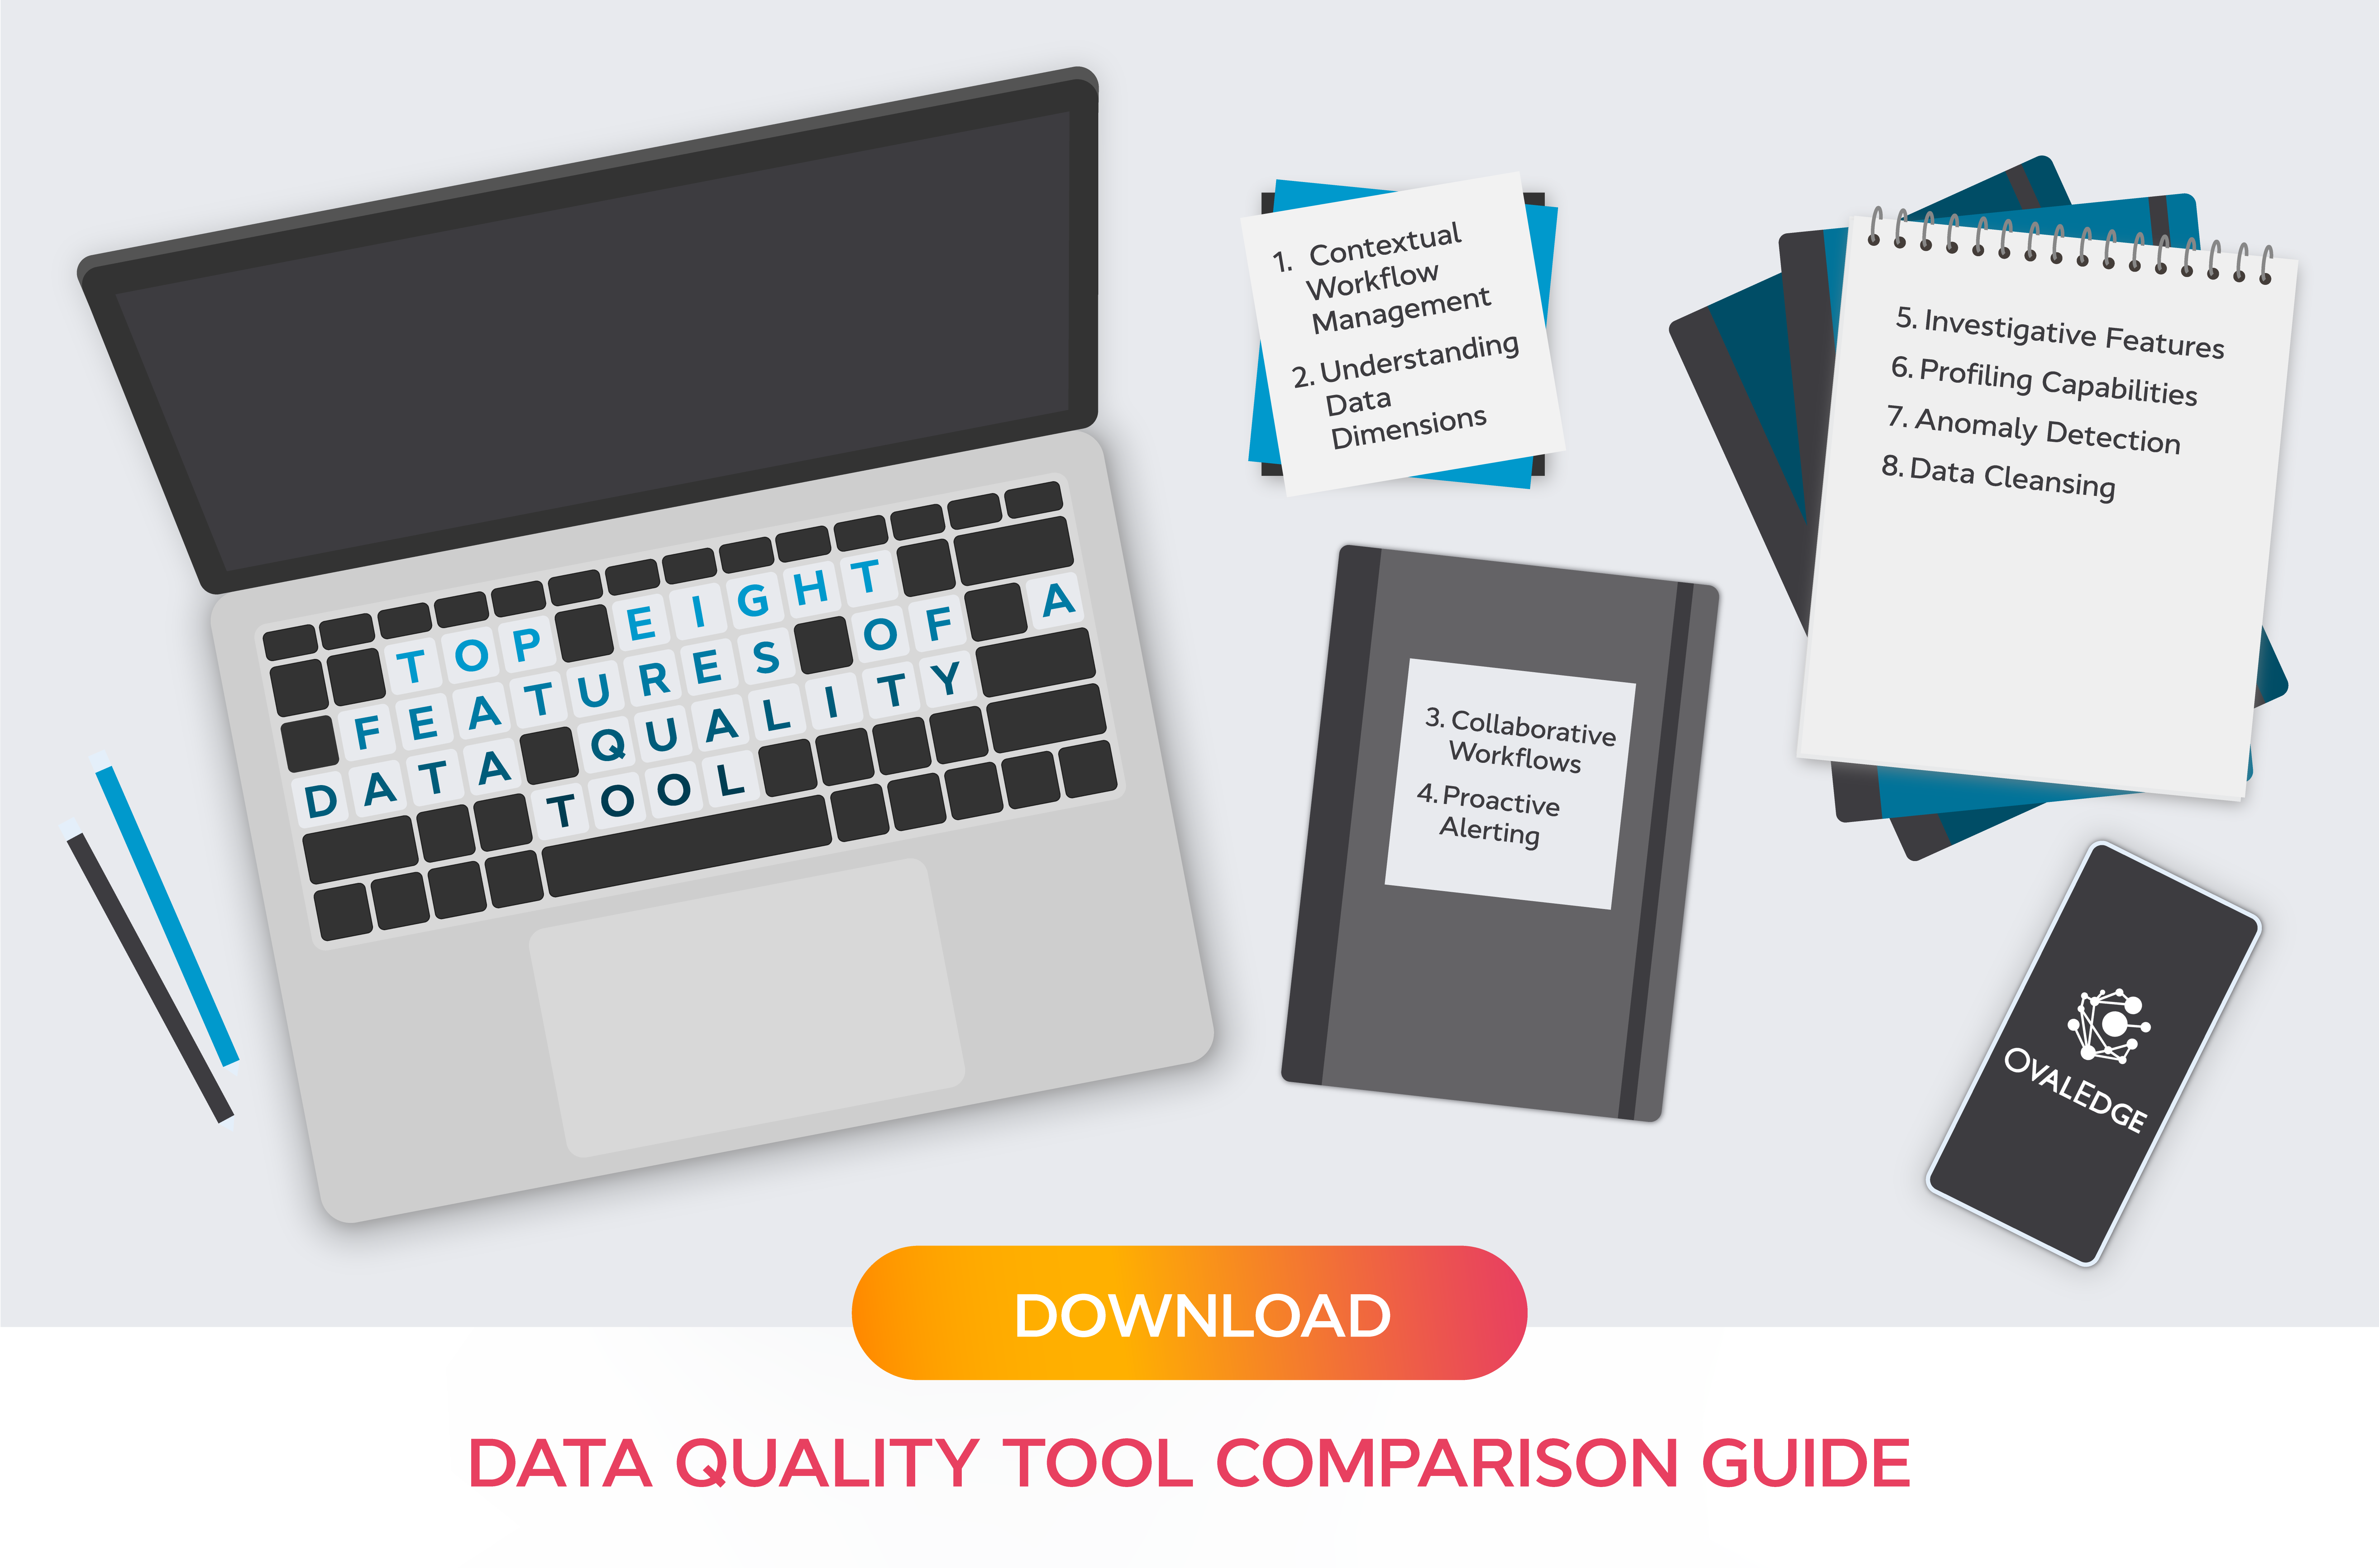 Top 8 Features of a Data Quality Tool